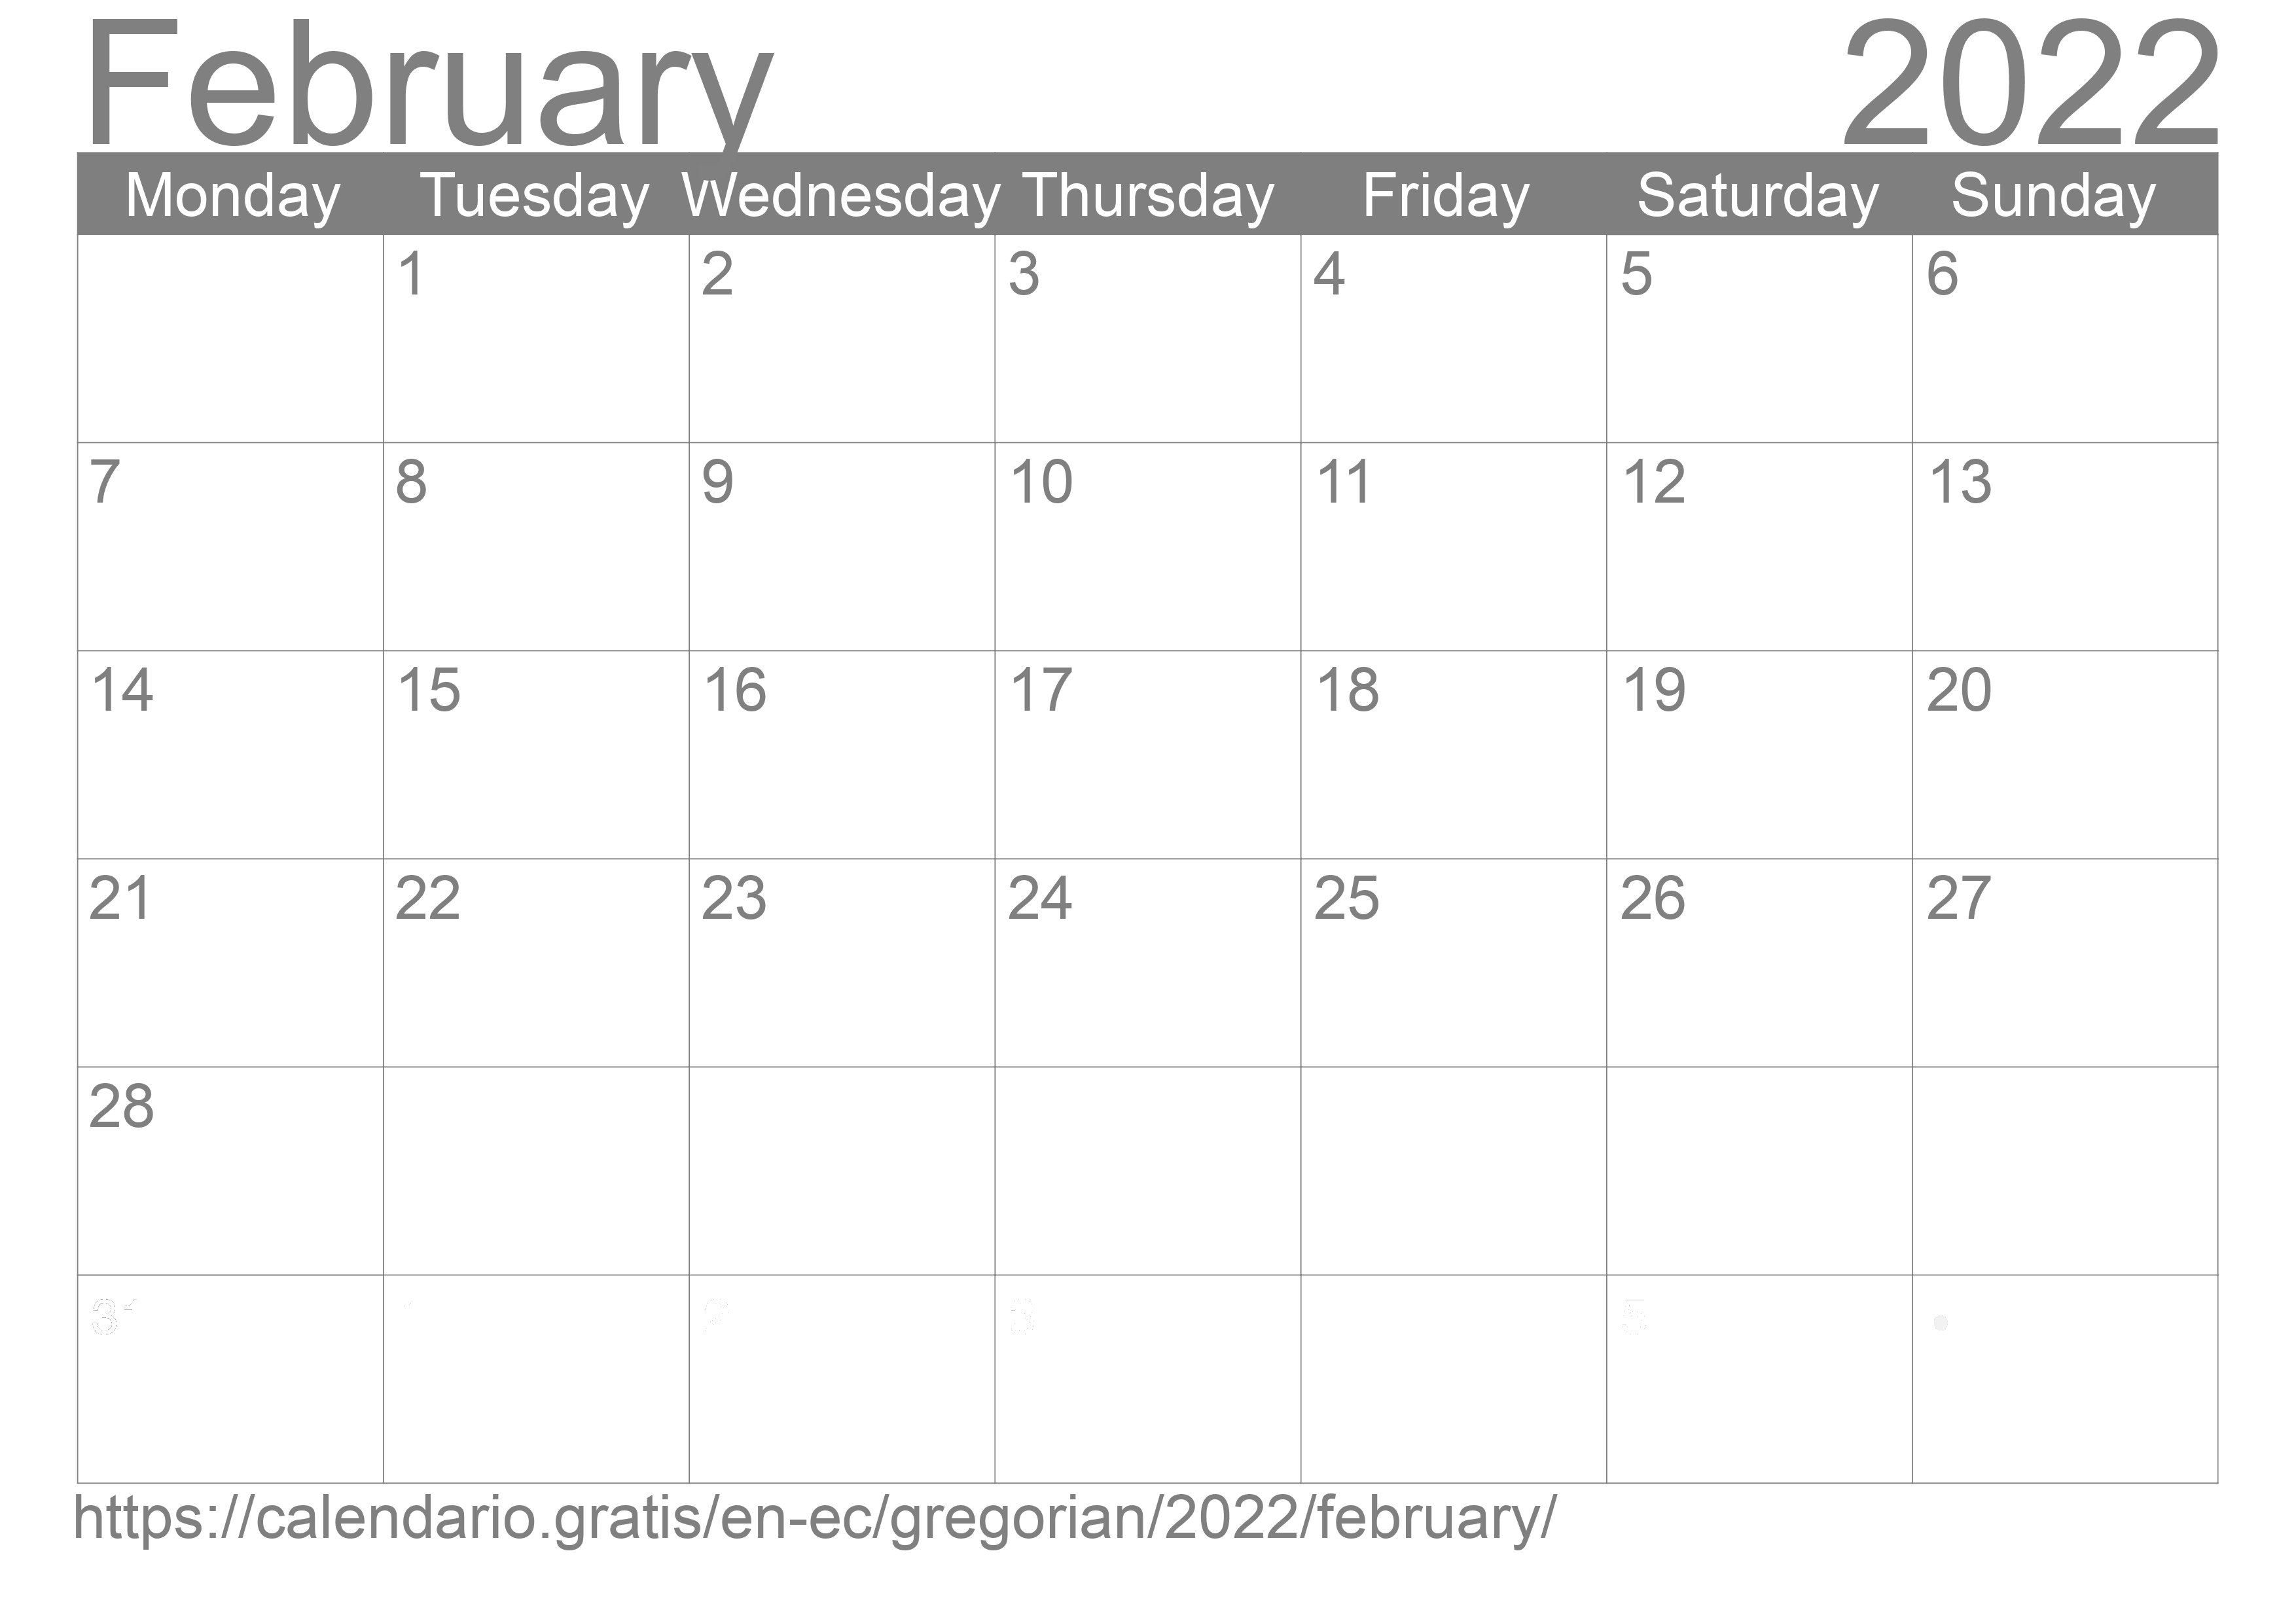 Calendar February 2022 from Ecuador in English: Holidays and moon phase